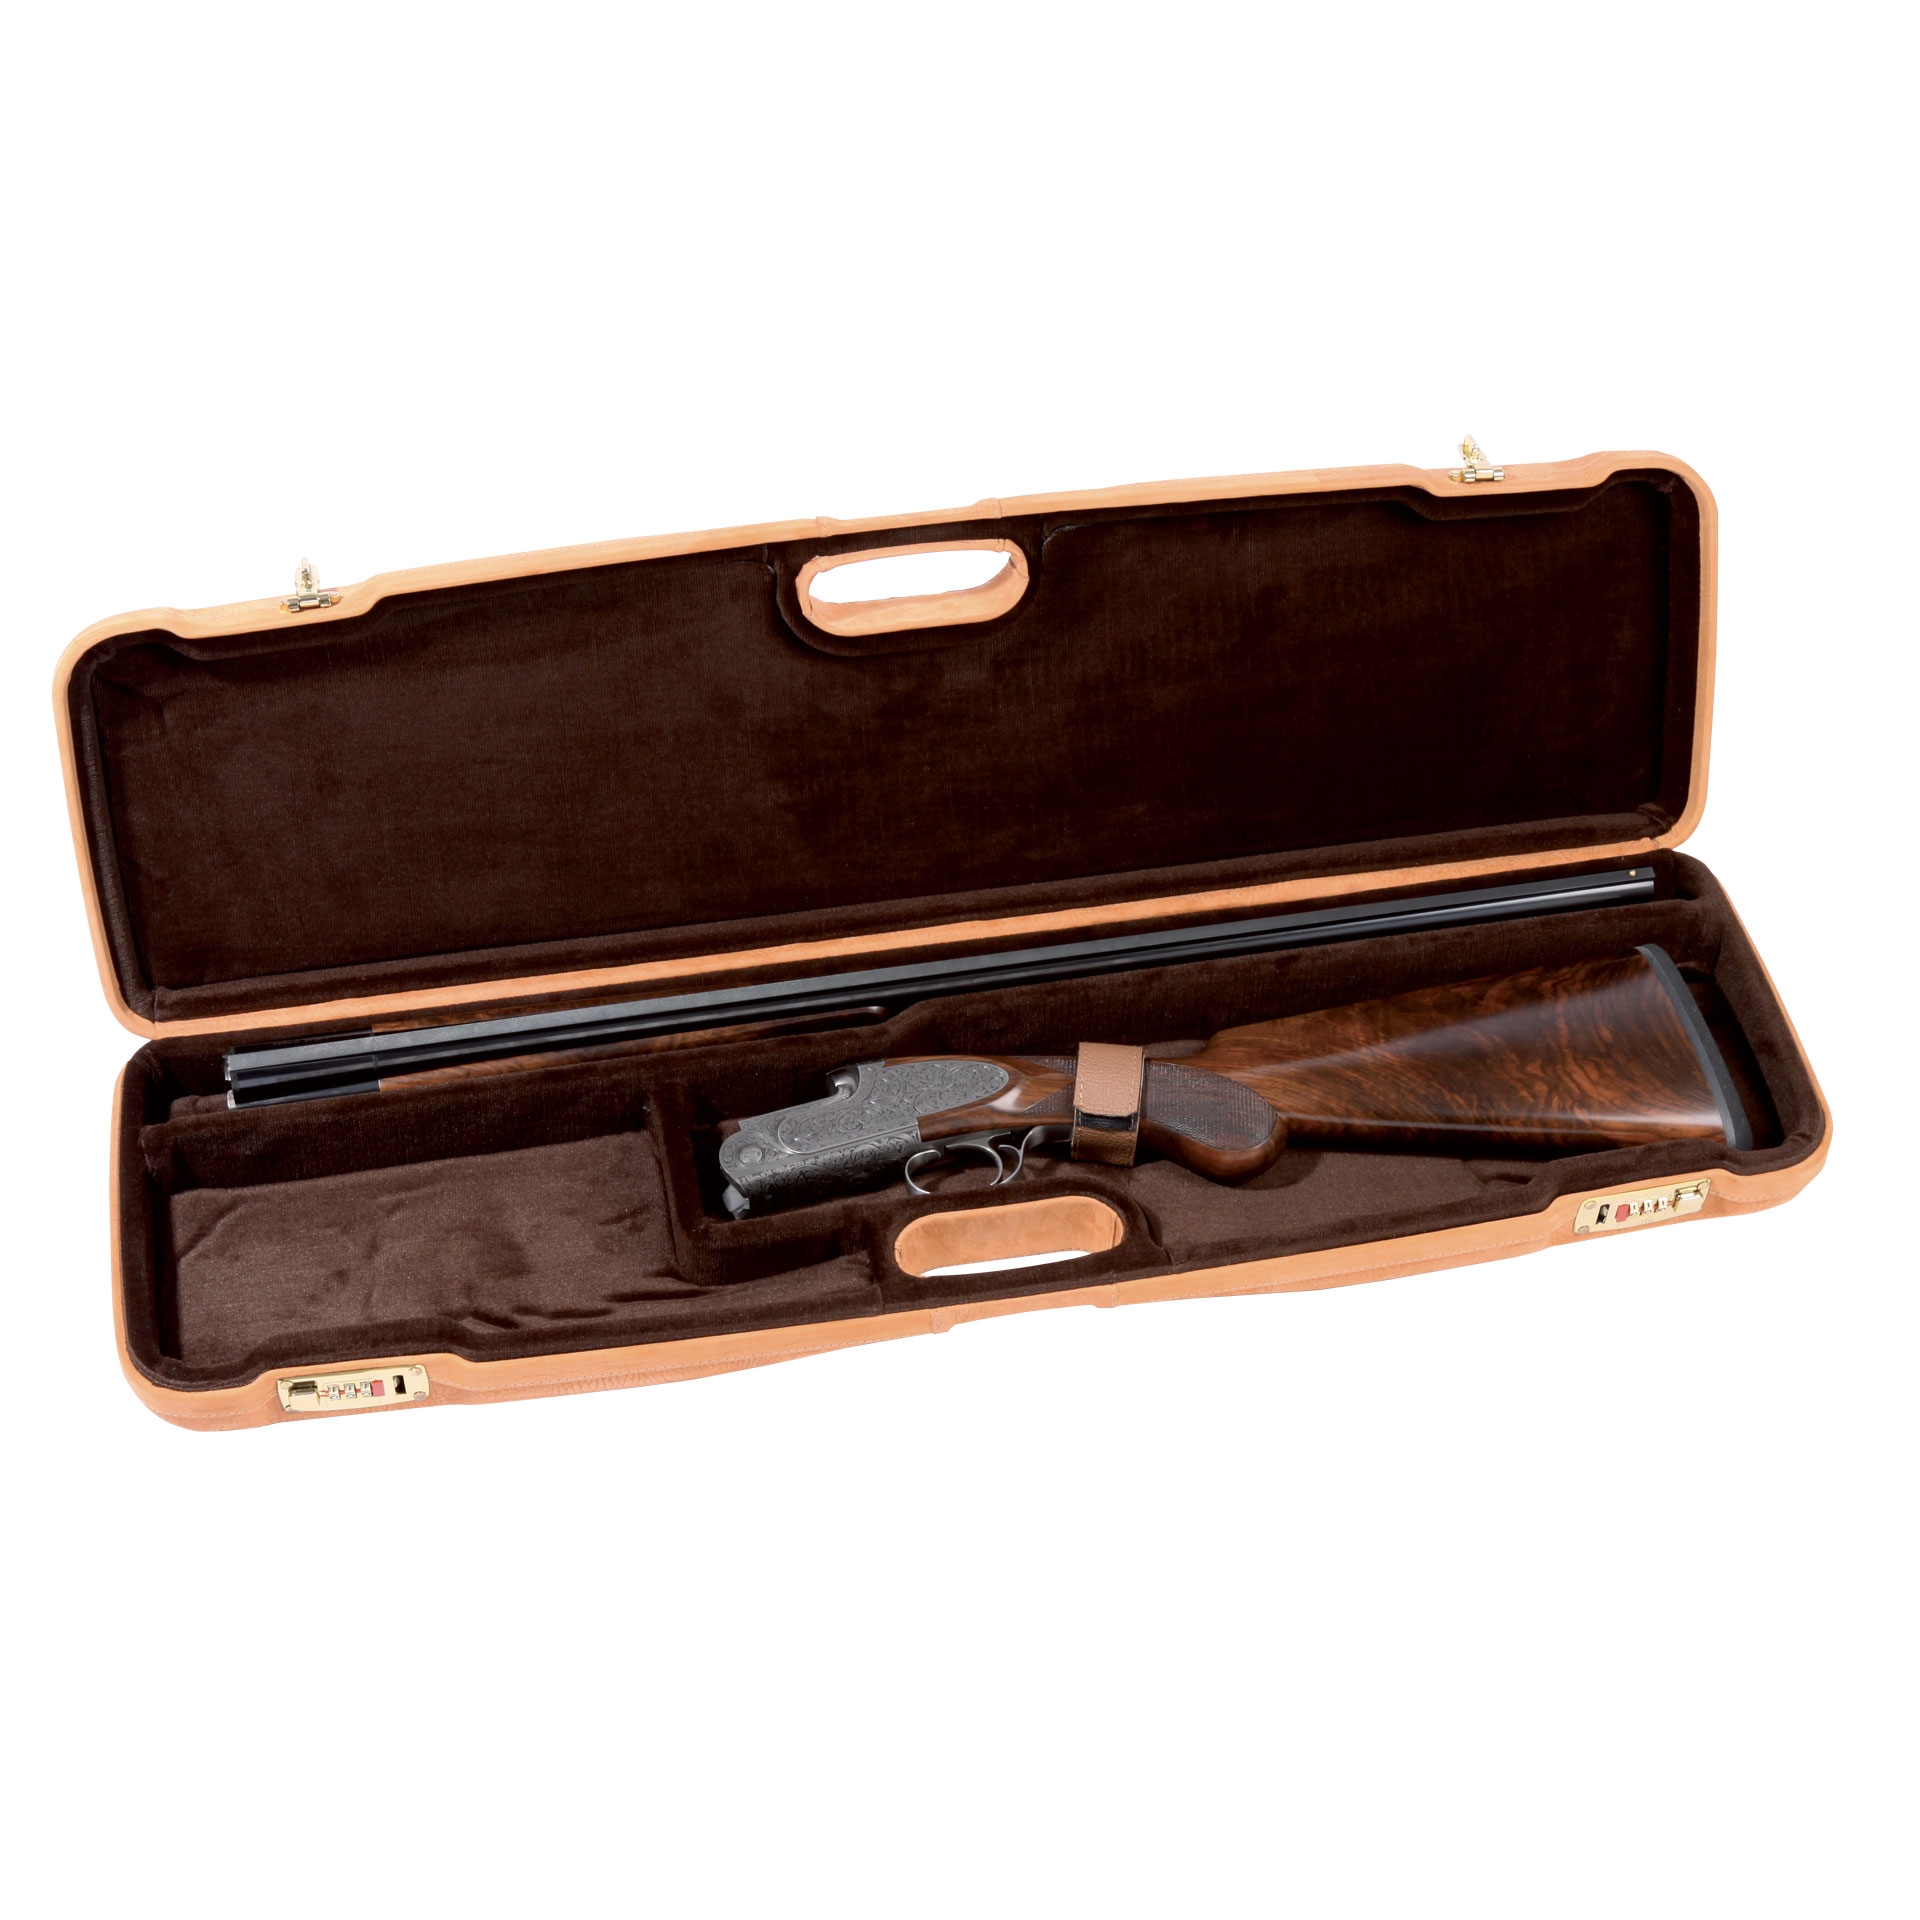 KIT BROWNING DI PULIZIA UNIVERSALE DELUXE